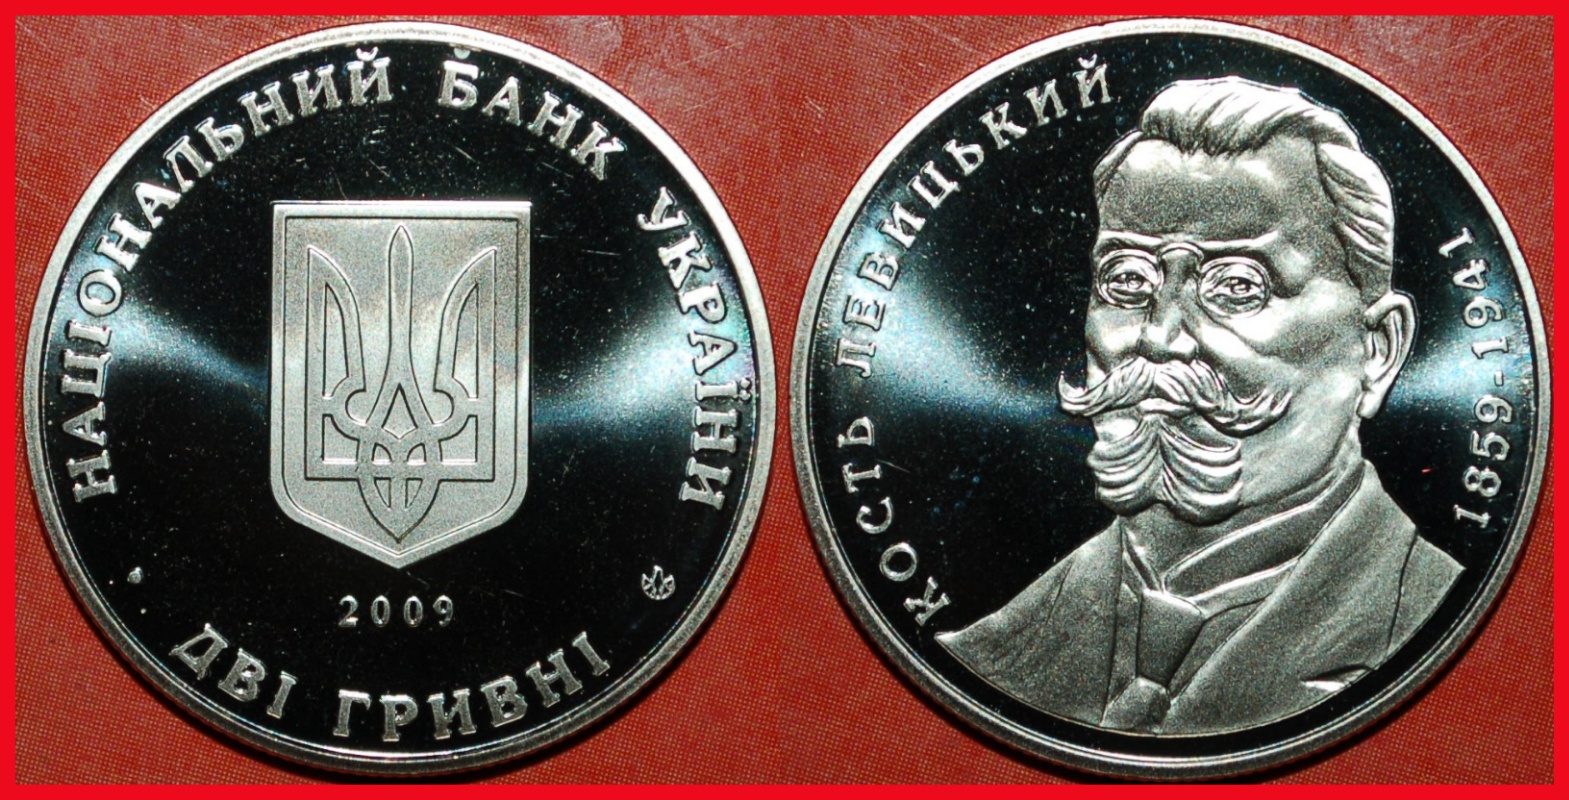  * COAT OF ARMS* ukraine (ex. the USSR, russia)★ 2 grivnas 2009 GERMAN SILVER★ NO RESERVE!   